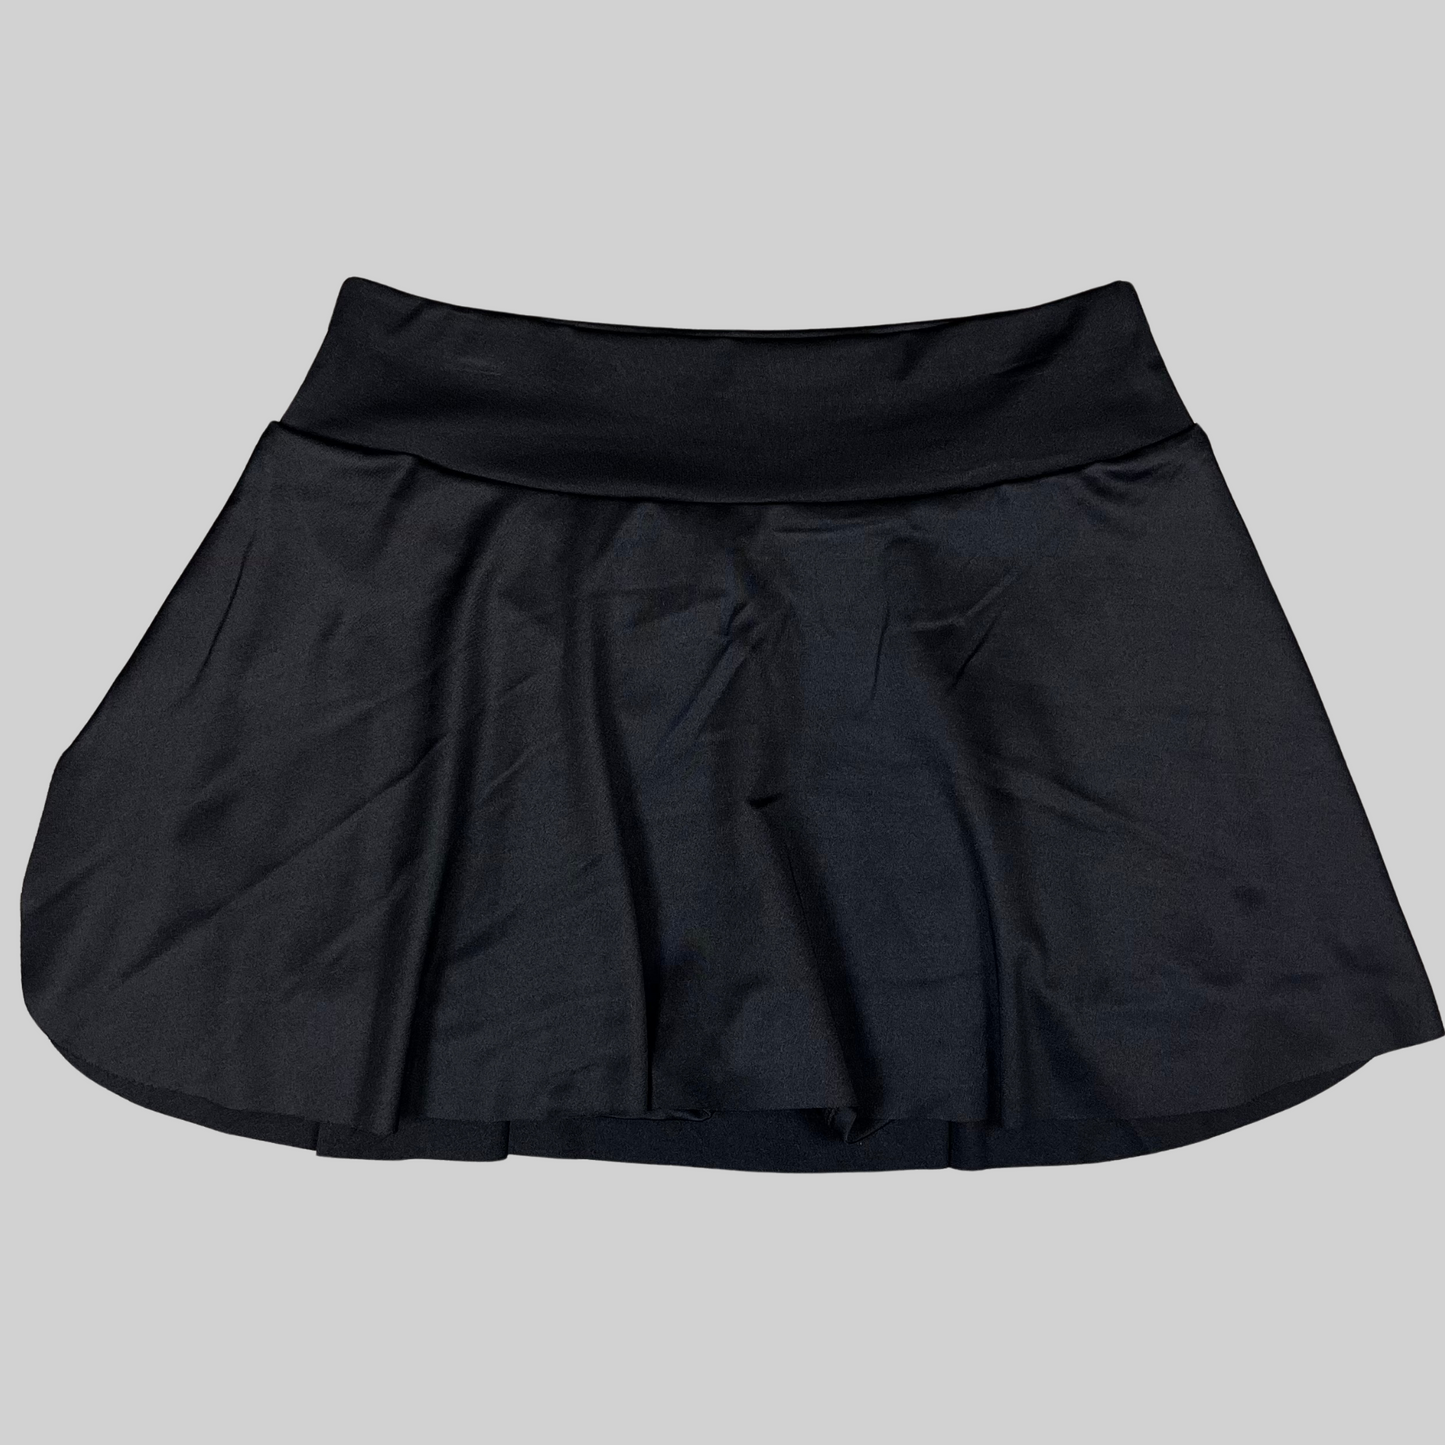 Yoga Fitness Sports Skirt With Built-In Shorts & Side Pockets